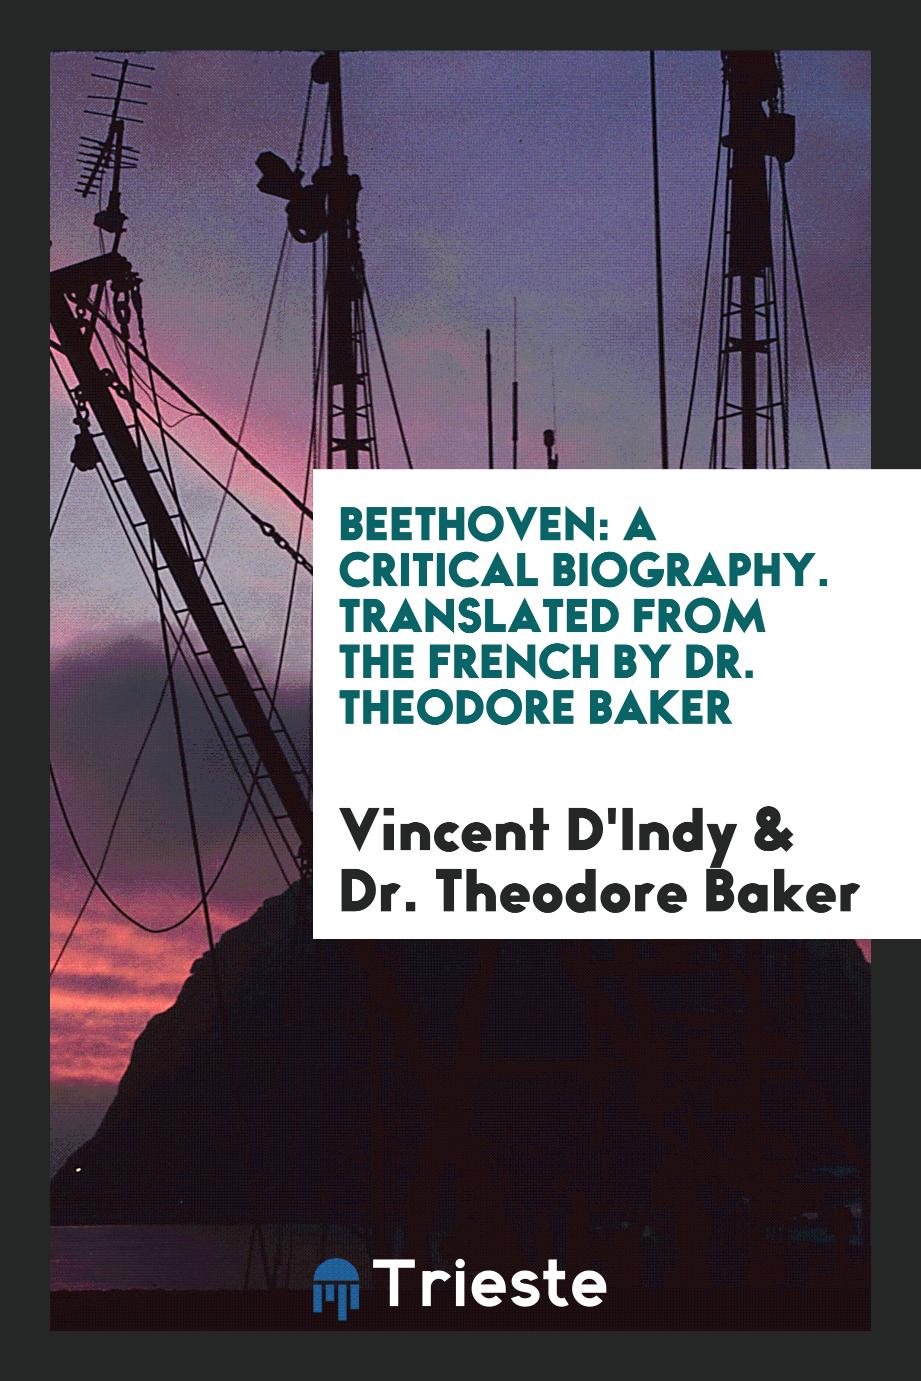 Beethoven: A Critical Biography. Translated from the French by Dr. Theodore Baker